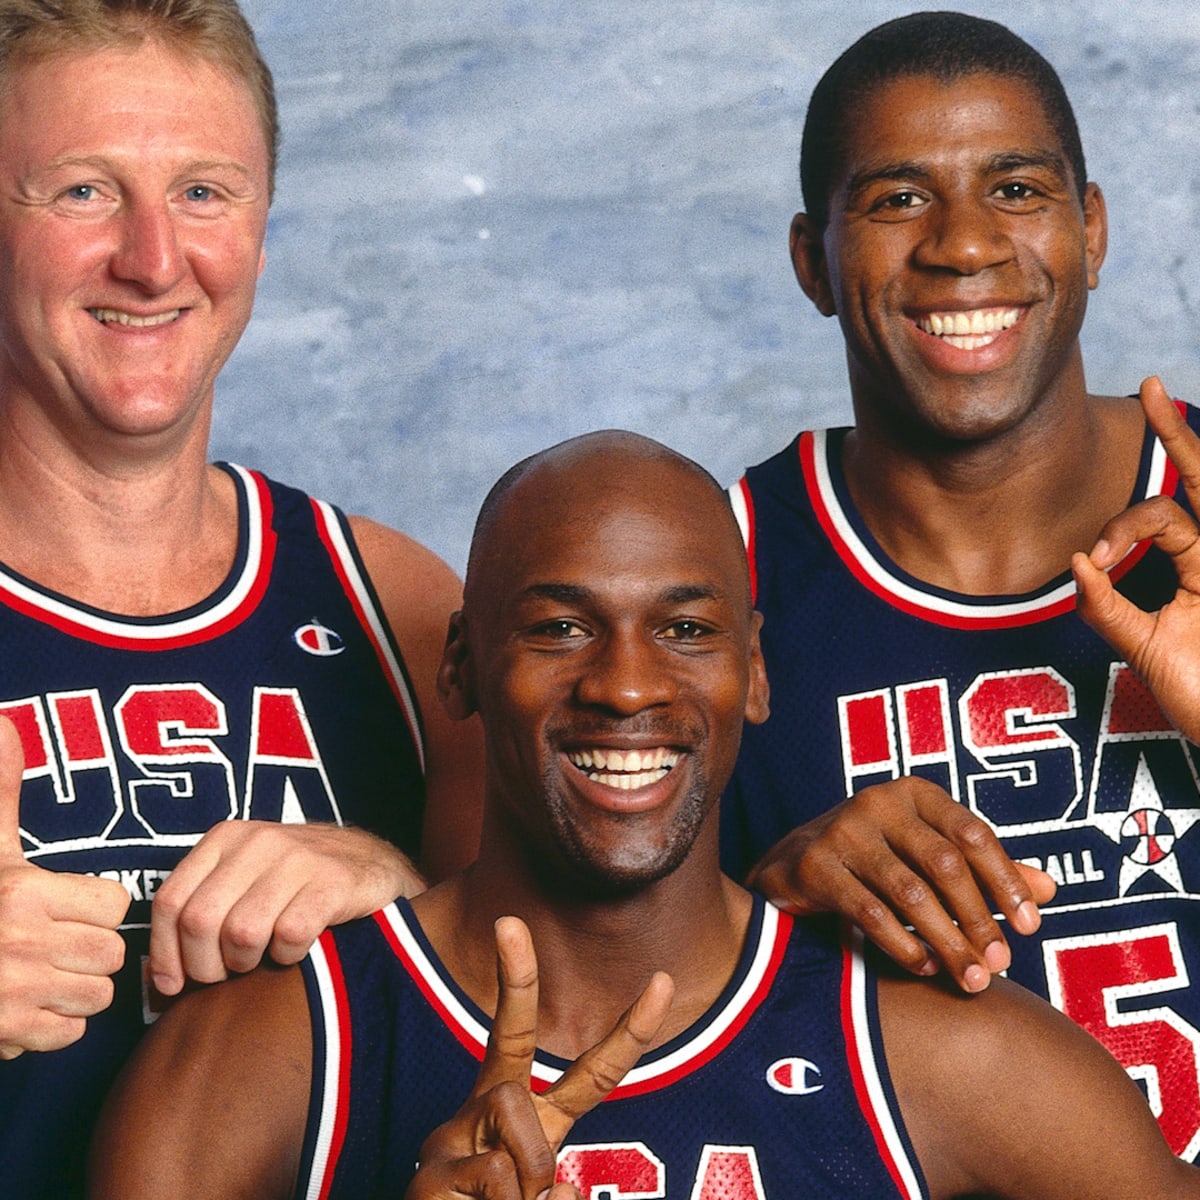 1992 Dream Team vs. 2008 Redeem Team: Who would win?